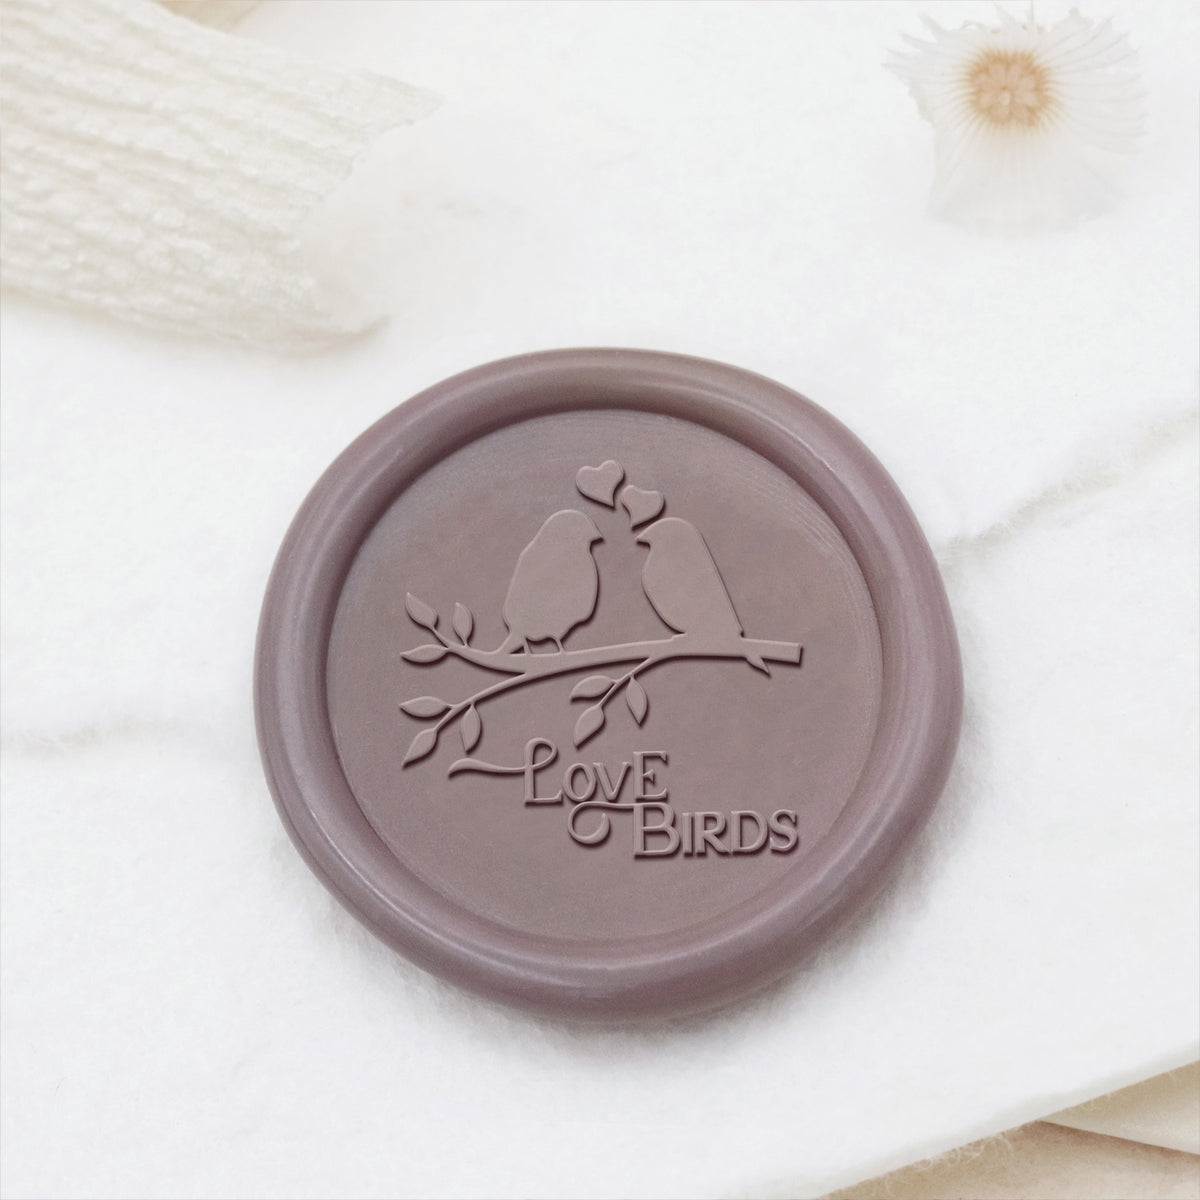 Wedding Invitation & Announcement Wax Seal Stamp - Style 16 16-2